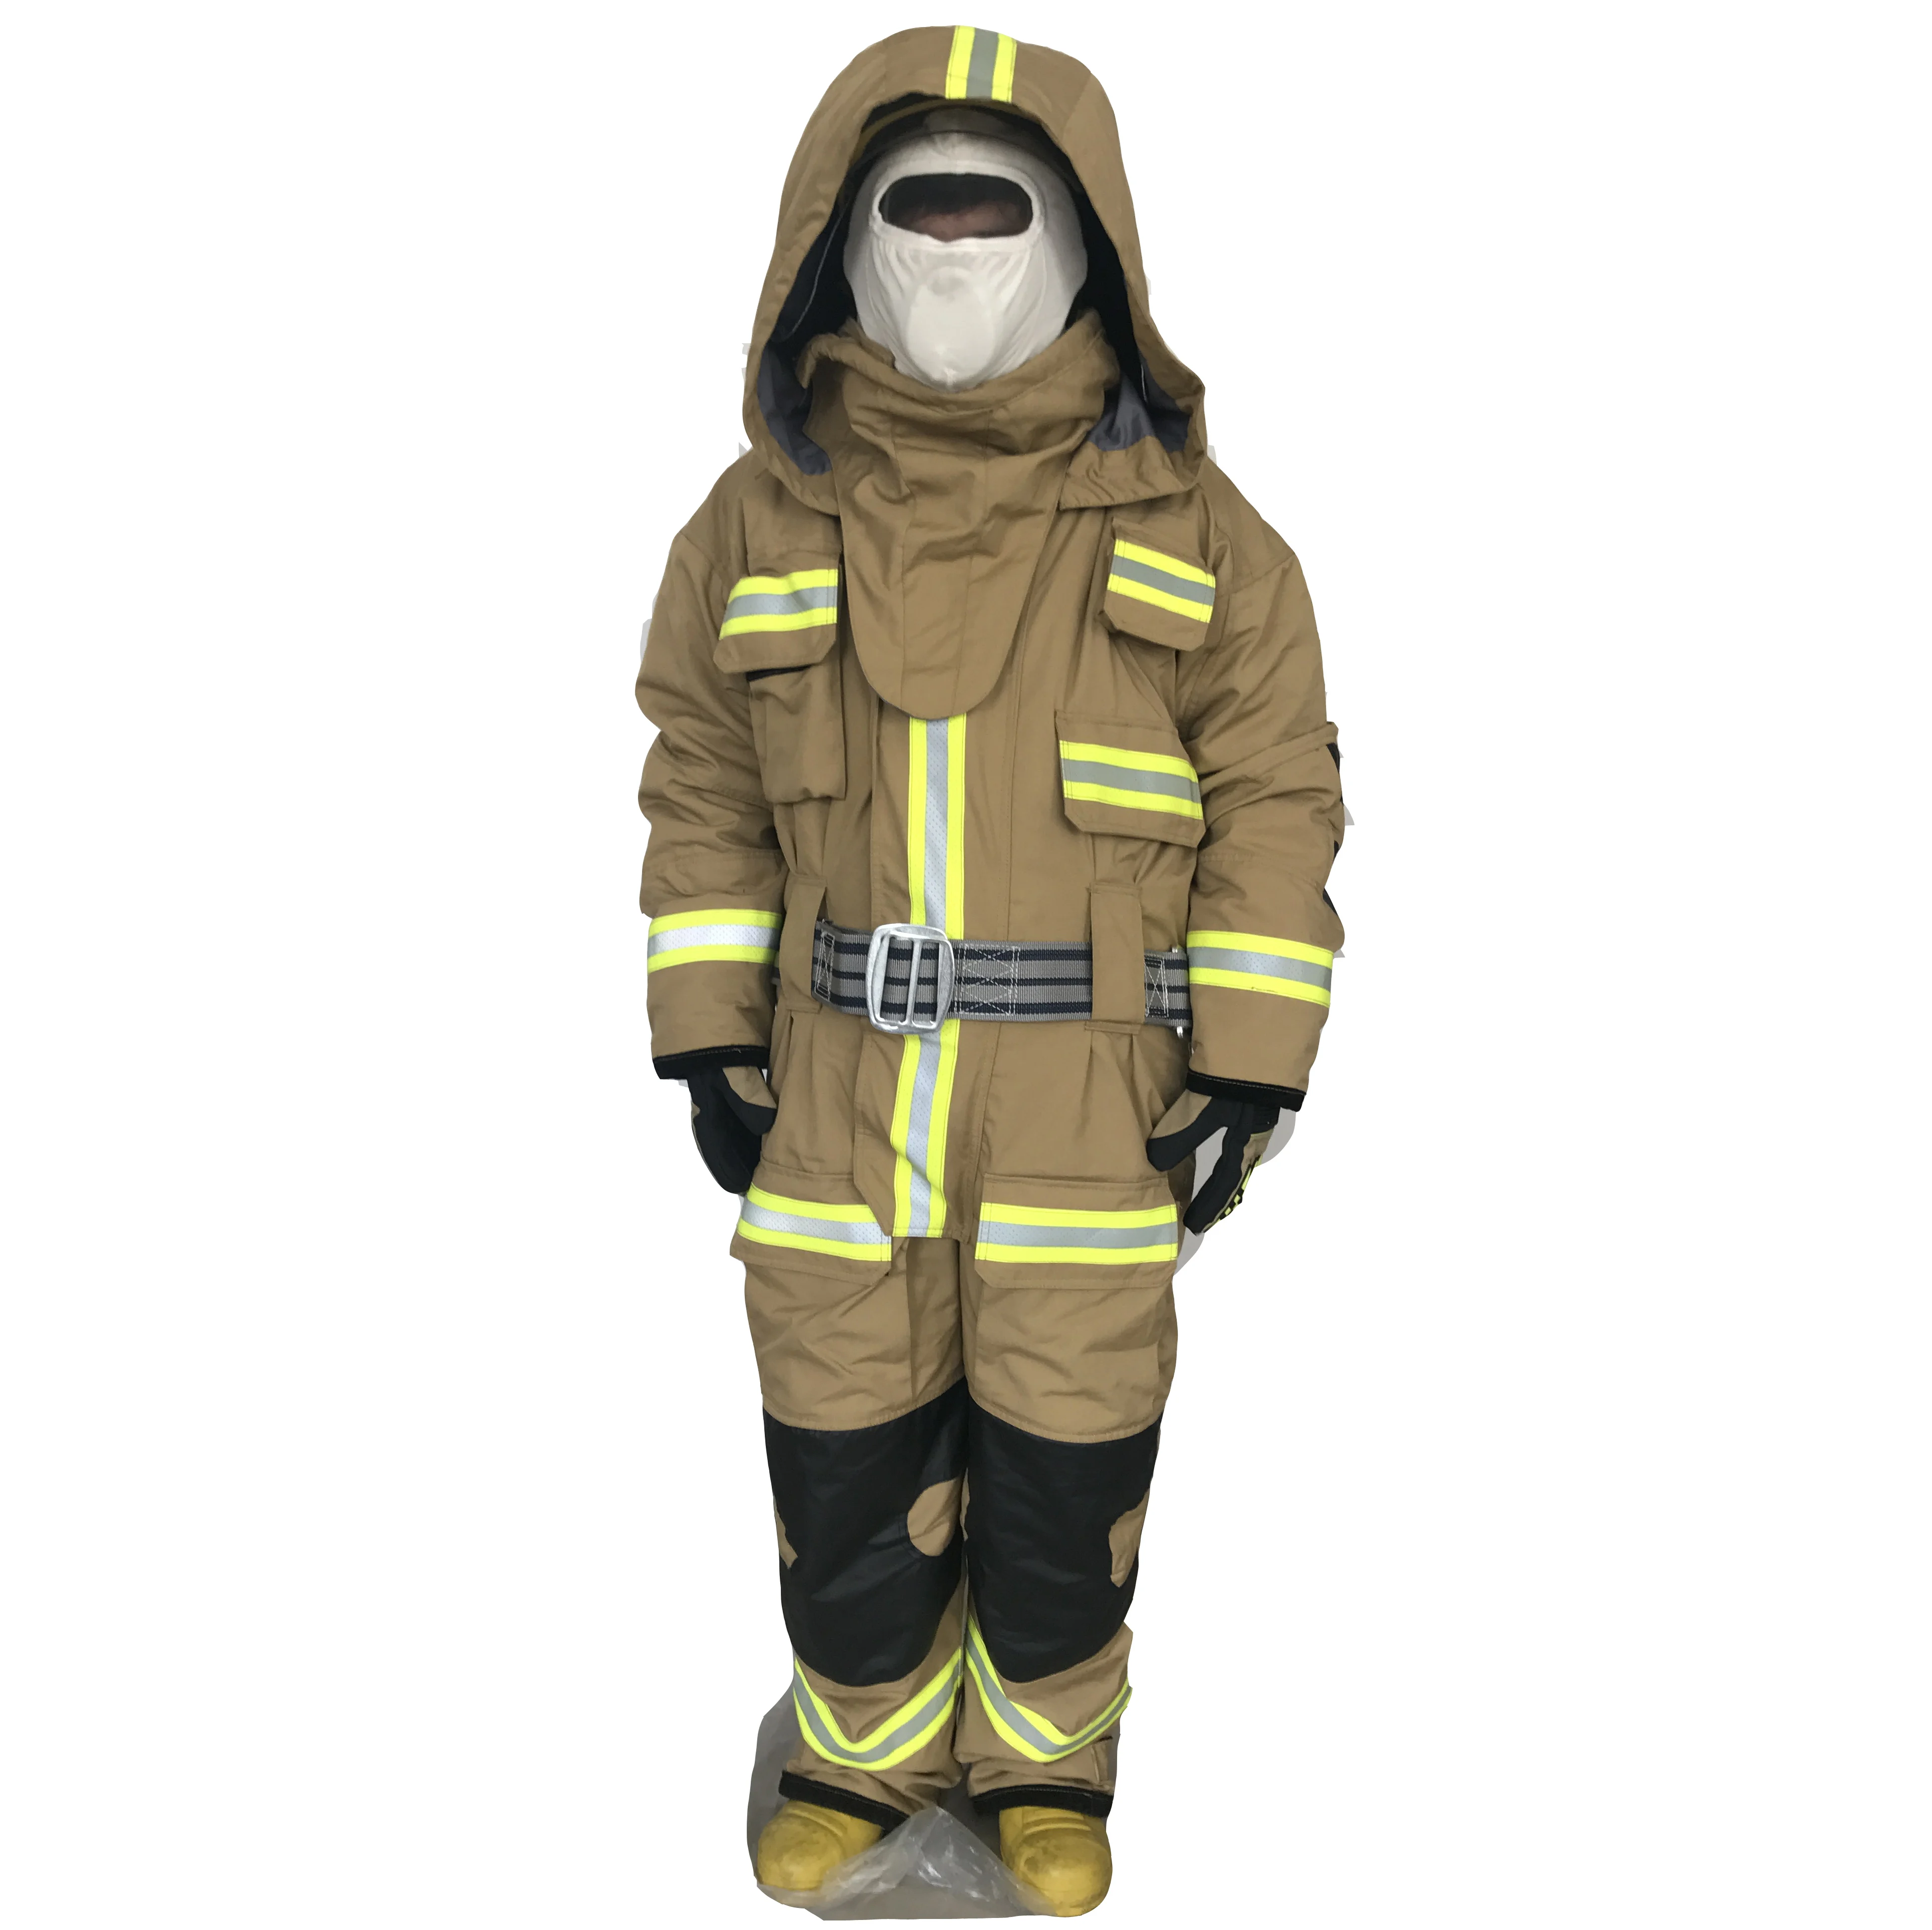 Mkf-04 Nomex Aramid Fireman Suit For Vessel,Ship - Buy Flame Retardant Heat  Insulation Fire Fighting Fireman Protective Suit,Fire Fighted Safety  Suit,One-piece Fireman Gear Safety Garment Product on 